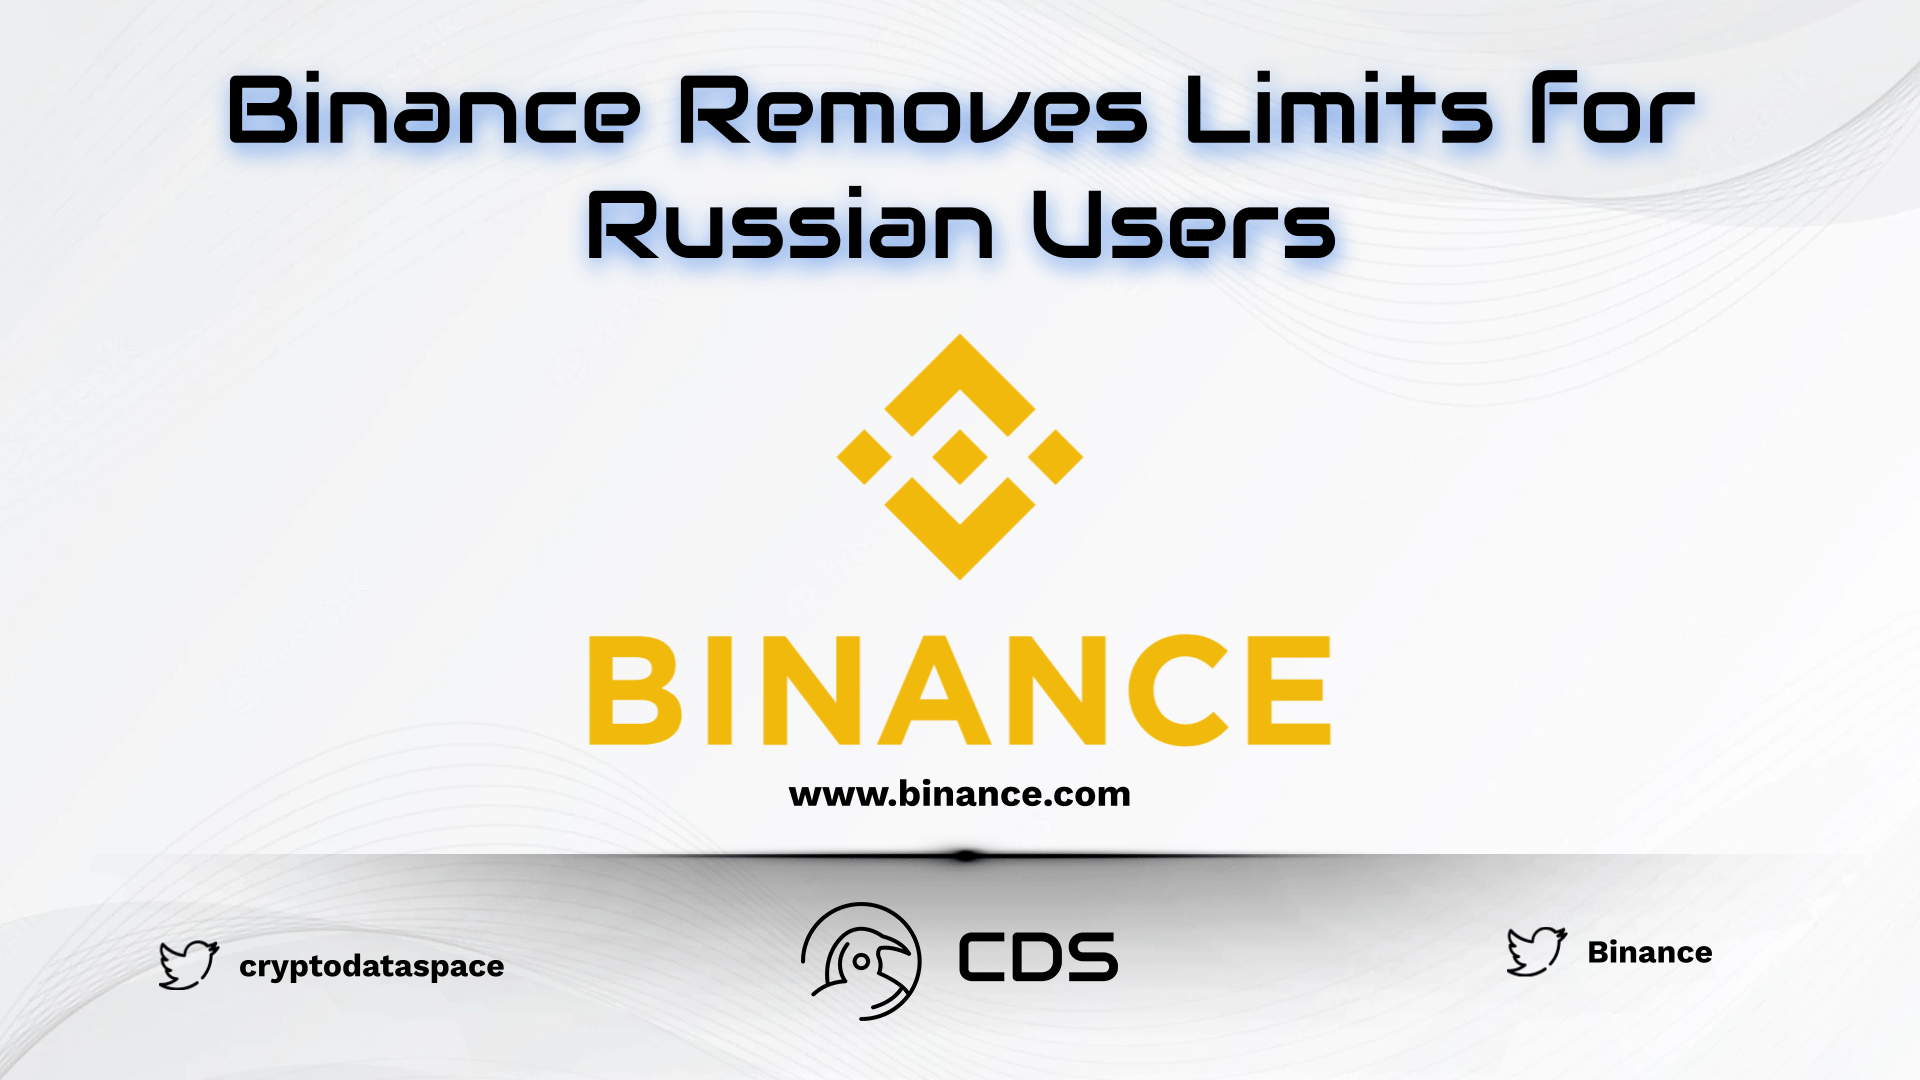 Binance Removes Limits for Russian Users